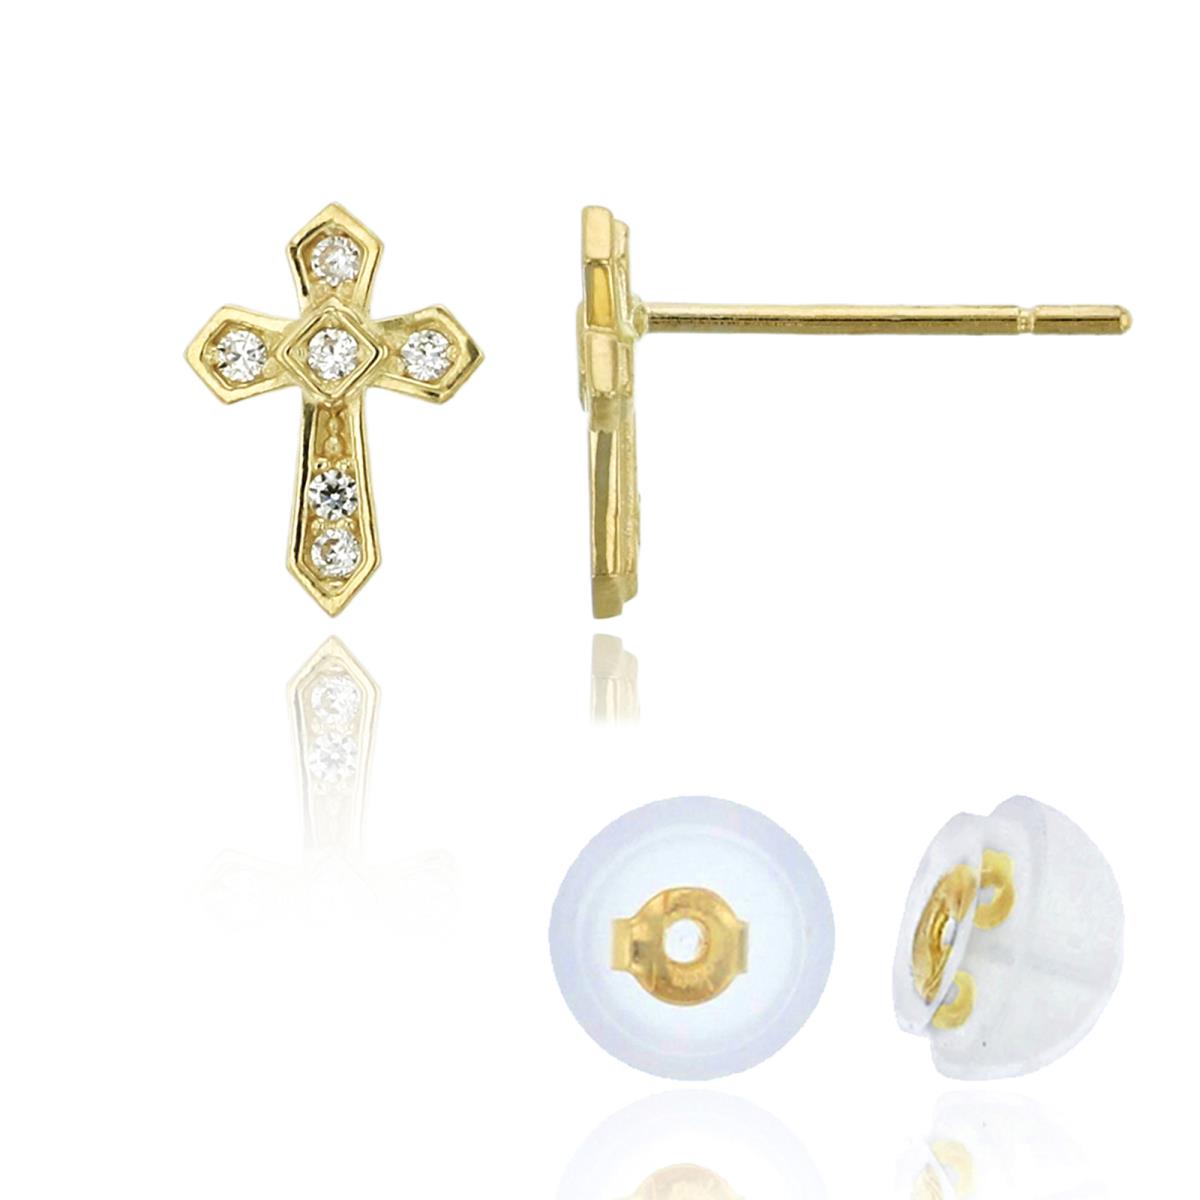 10K Yellow Gold Micropave 8x5mm Cross CZ Stud Earring & 10K Silicone Back